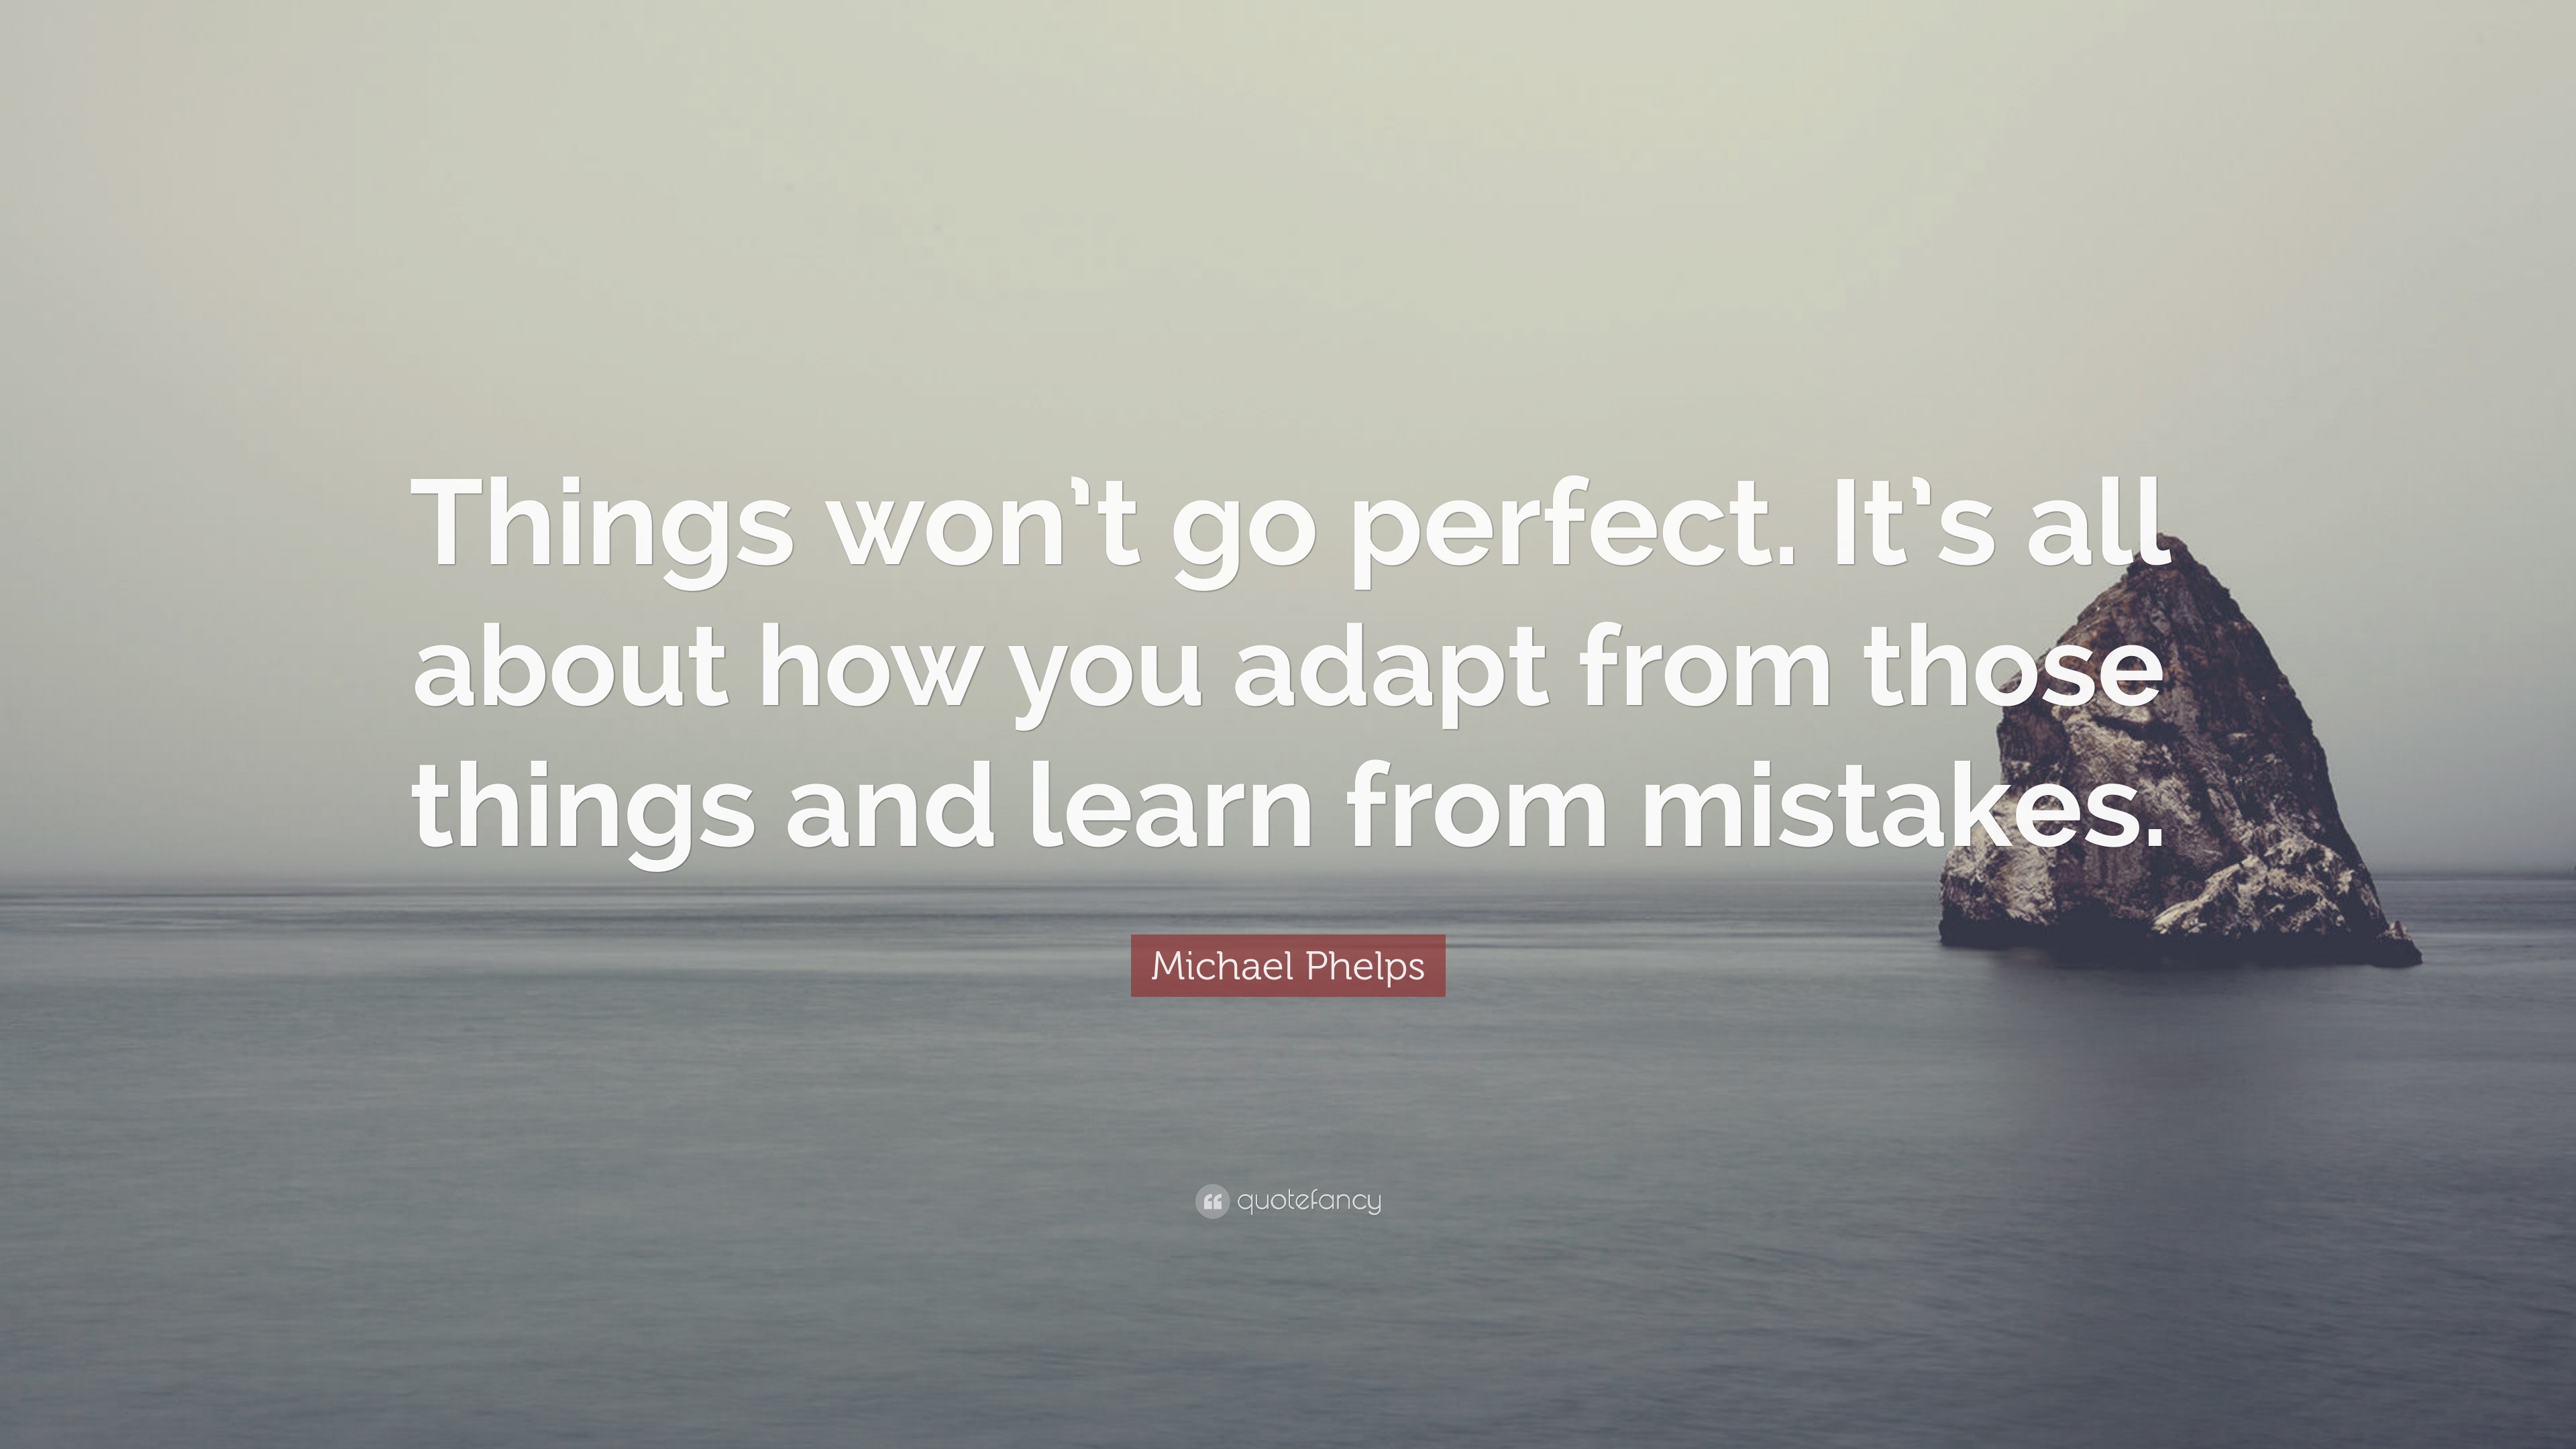 Michael Phelps Quote: “Things won't go perfect. It's all about how you adapt  from those